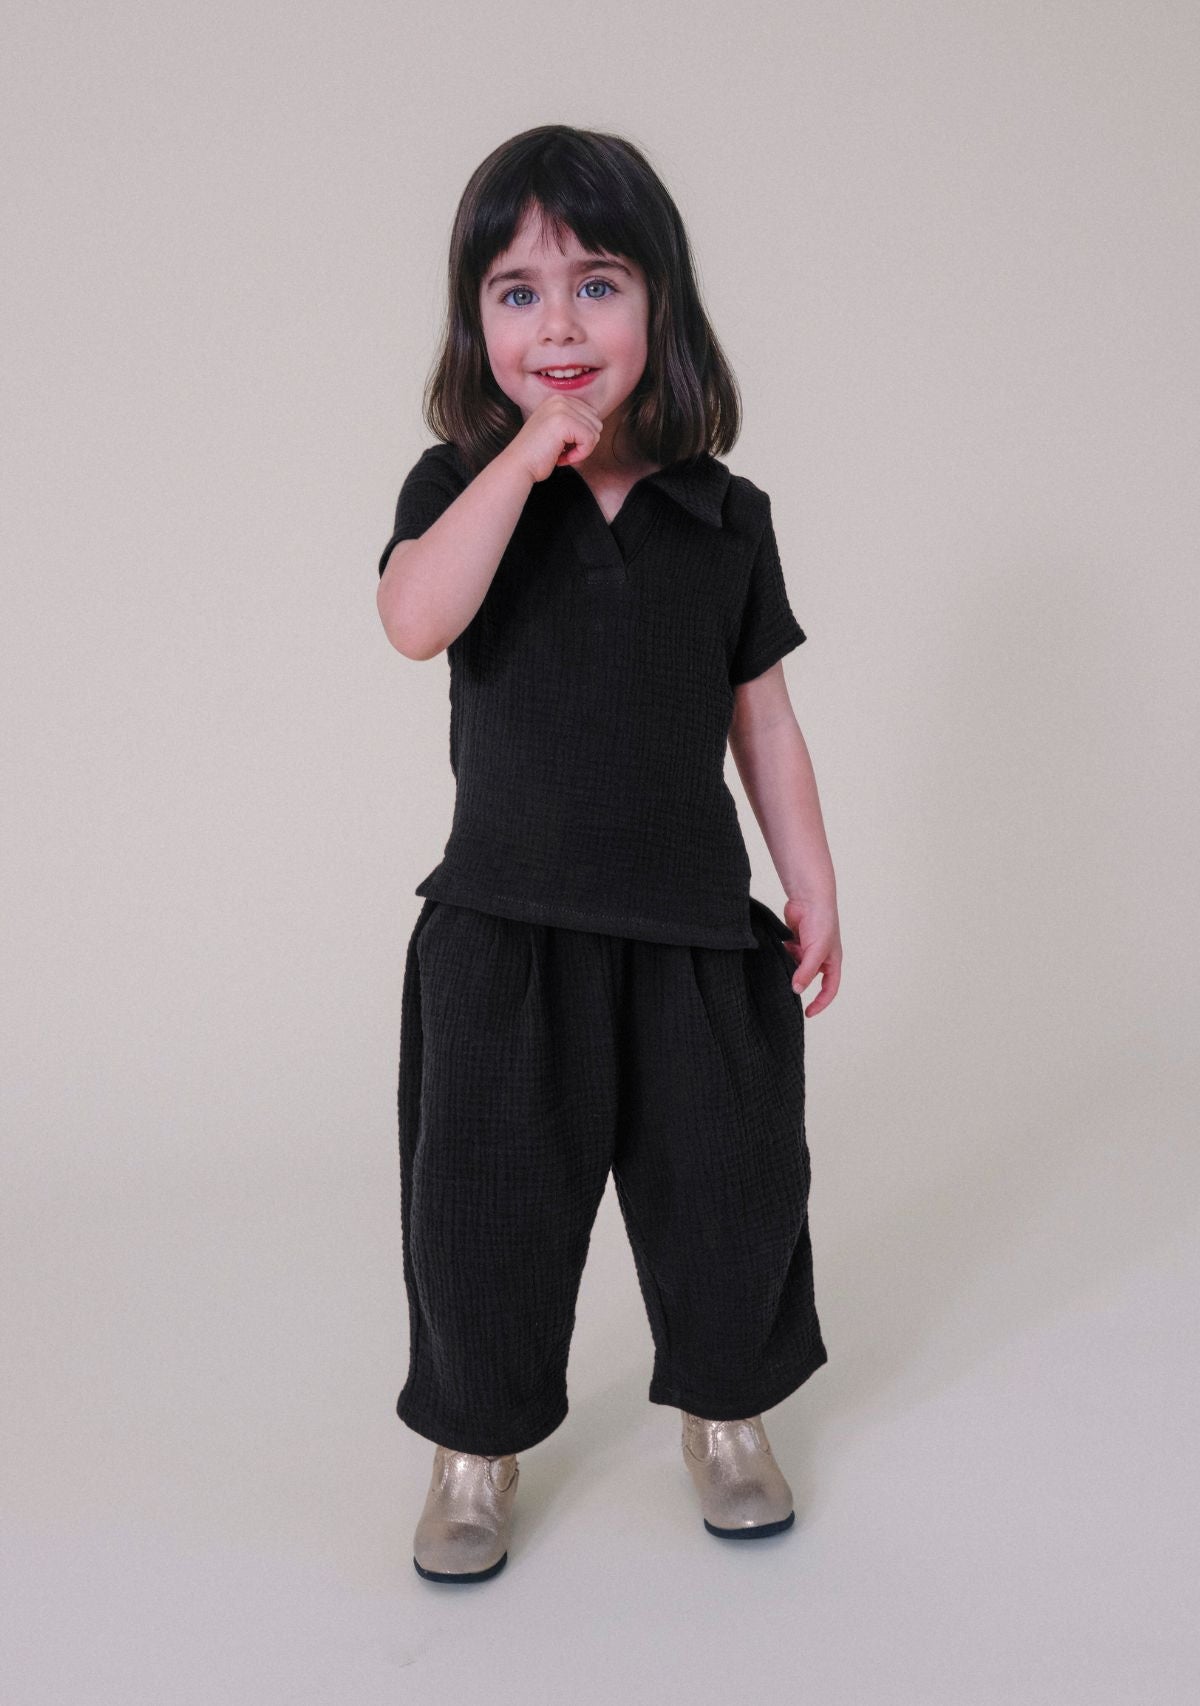 Black Organic Cotton Toddler Top and matching pant made ethically in Los Angeles, California. Sustainable Matching Toddler Sets